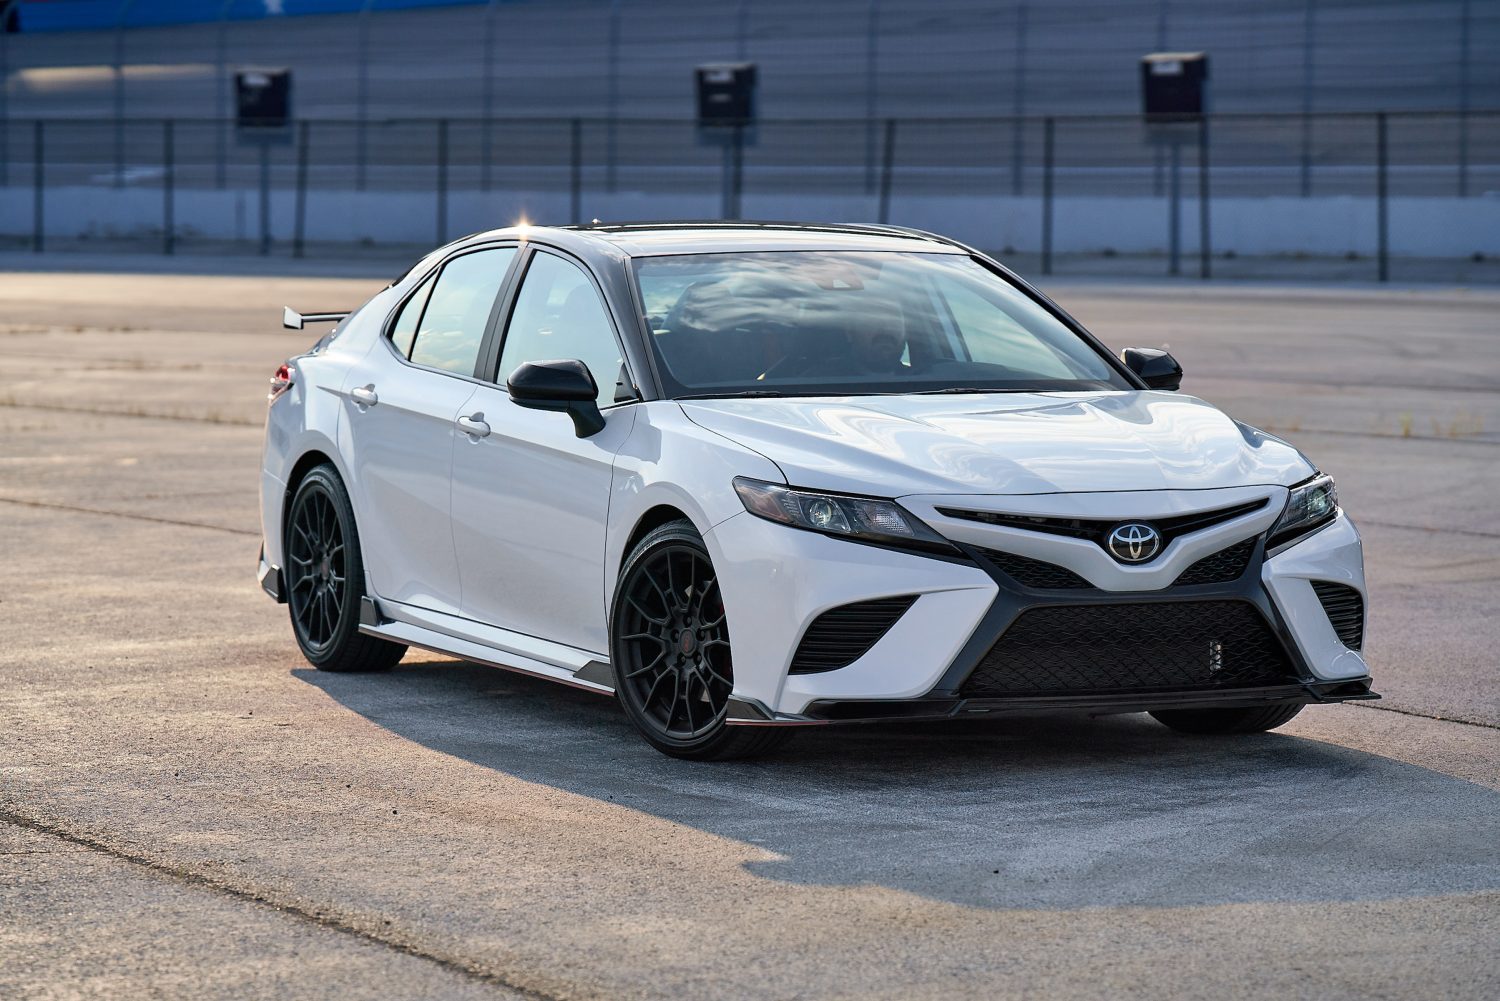 Trim Levels of the 2020 Toyota Camry